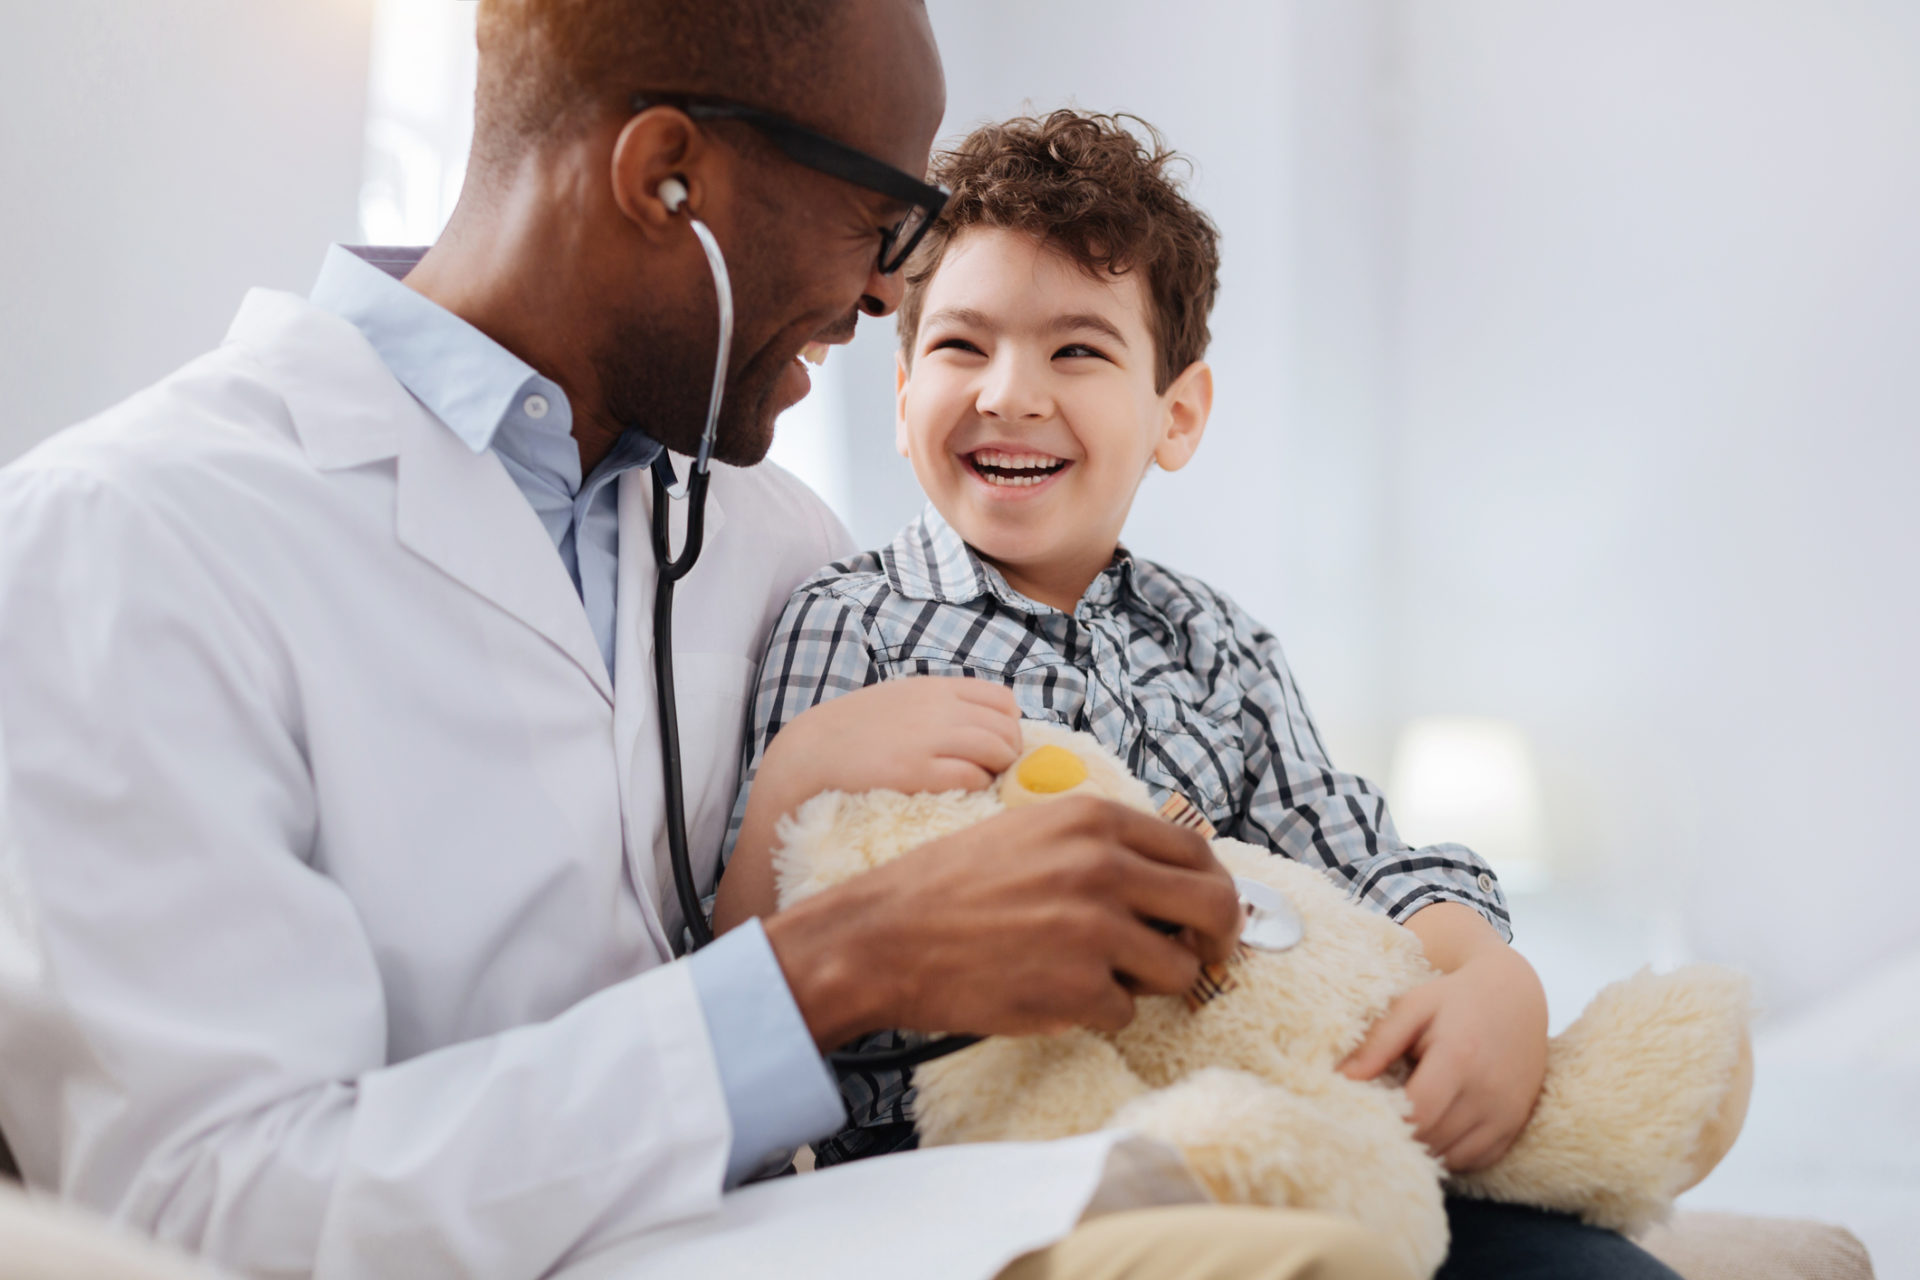 Pediatric Care: How to Find a Pediatrician | Midwest ...